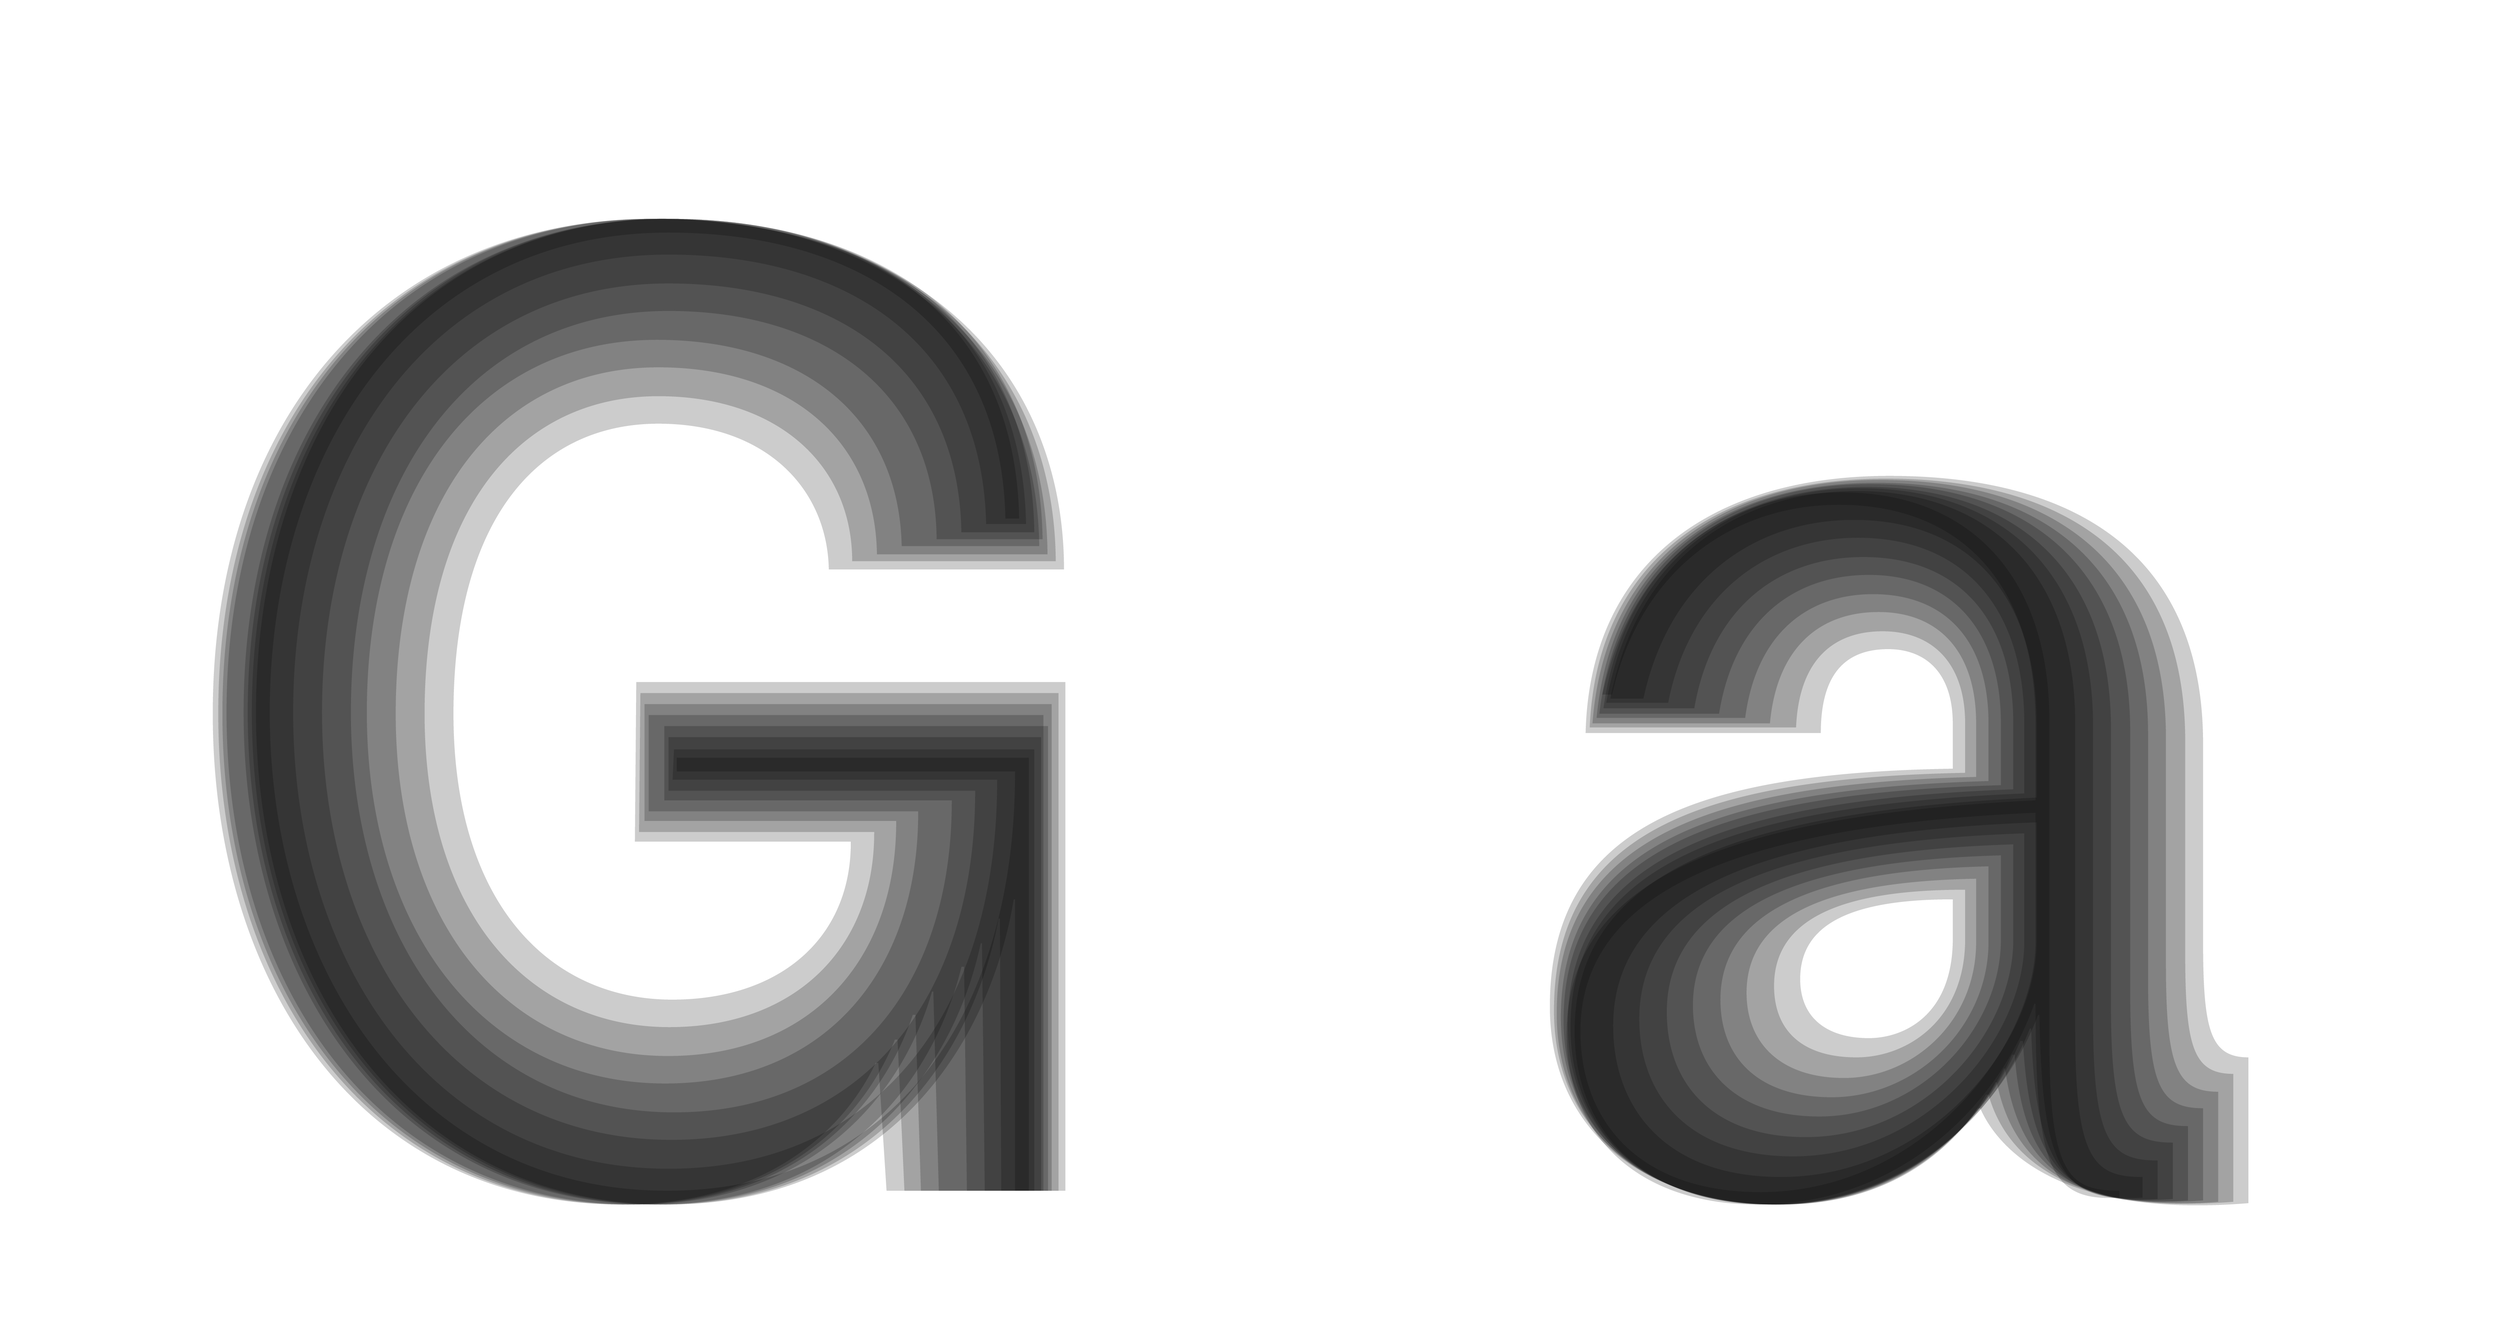  ‘G’ and ‘a’ are control characters for these two font styles. This image shows the growing of Greed’s axis. (Greed 0-200, Pride 100, Anger 100) 